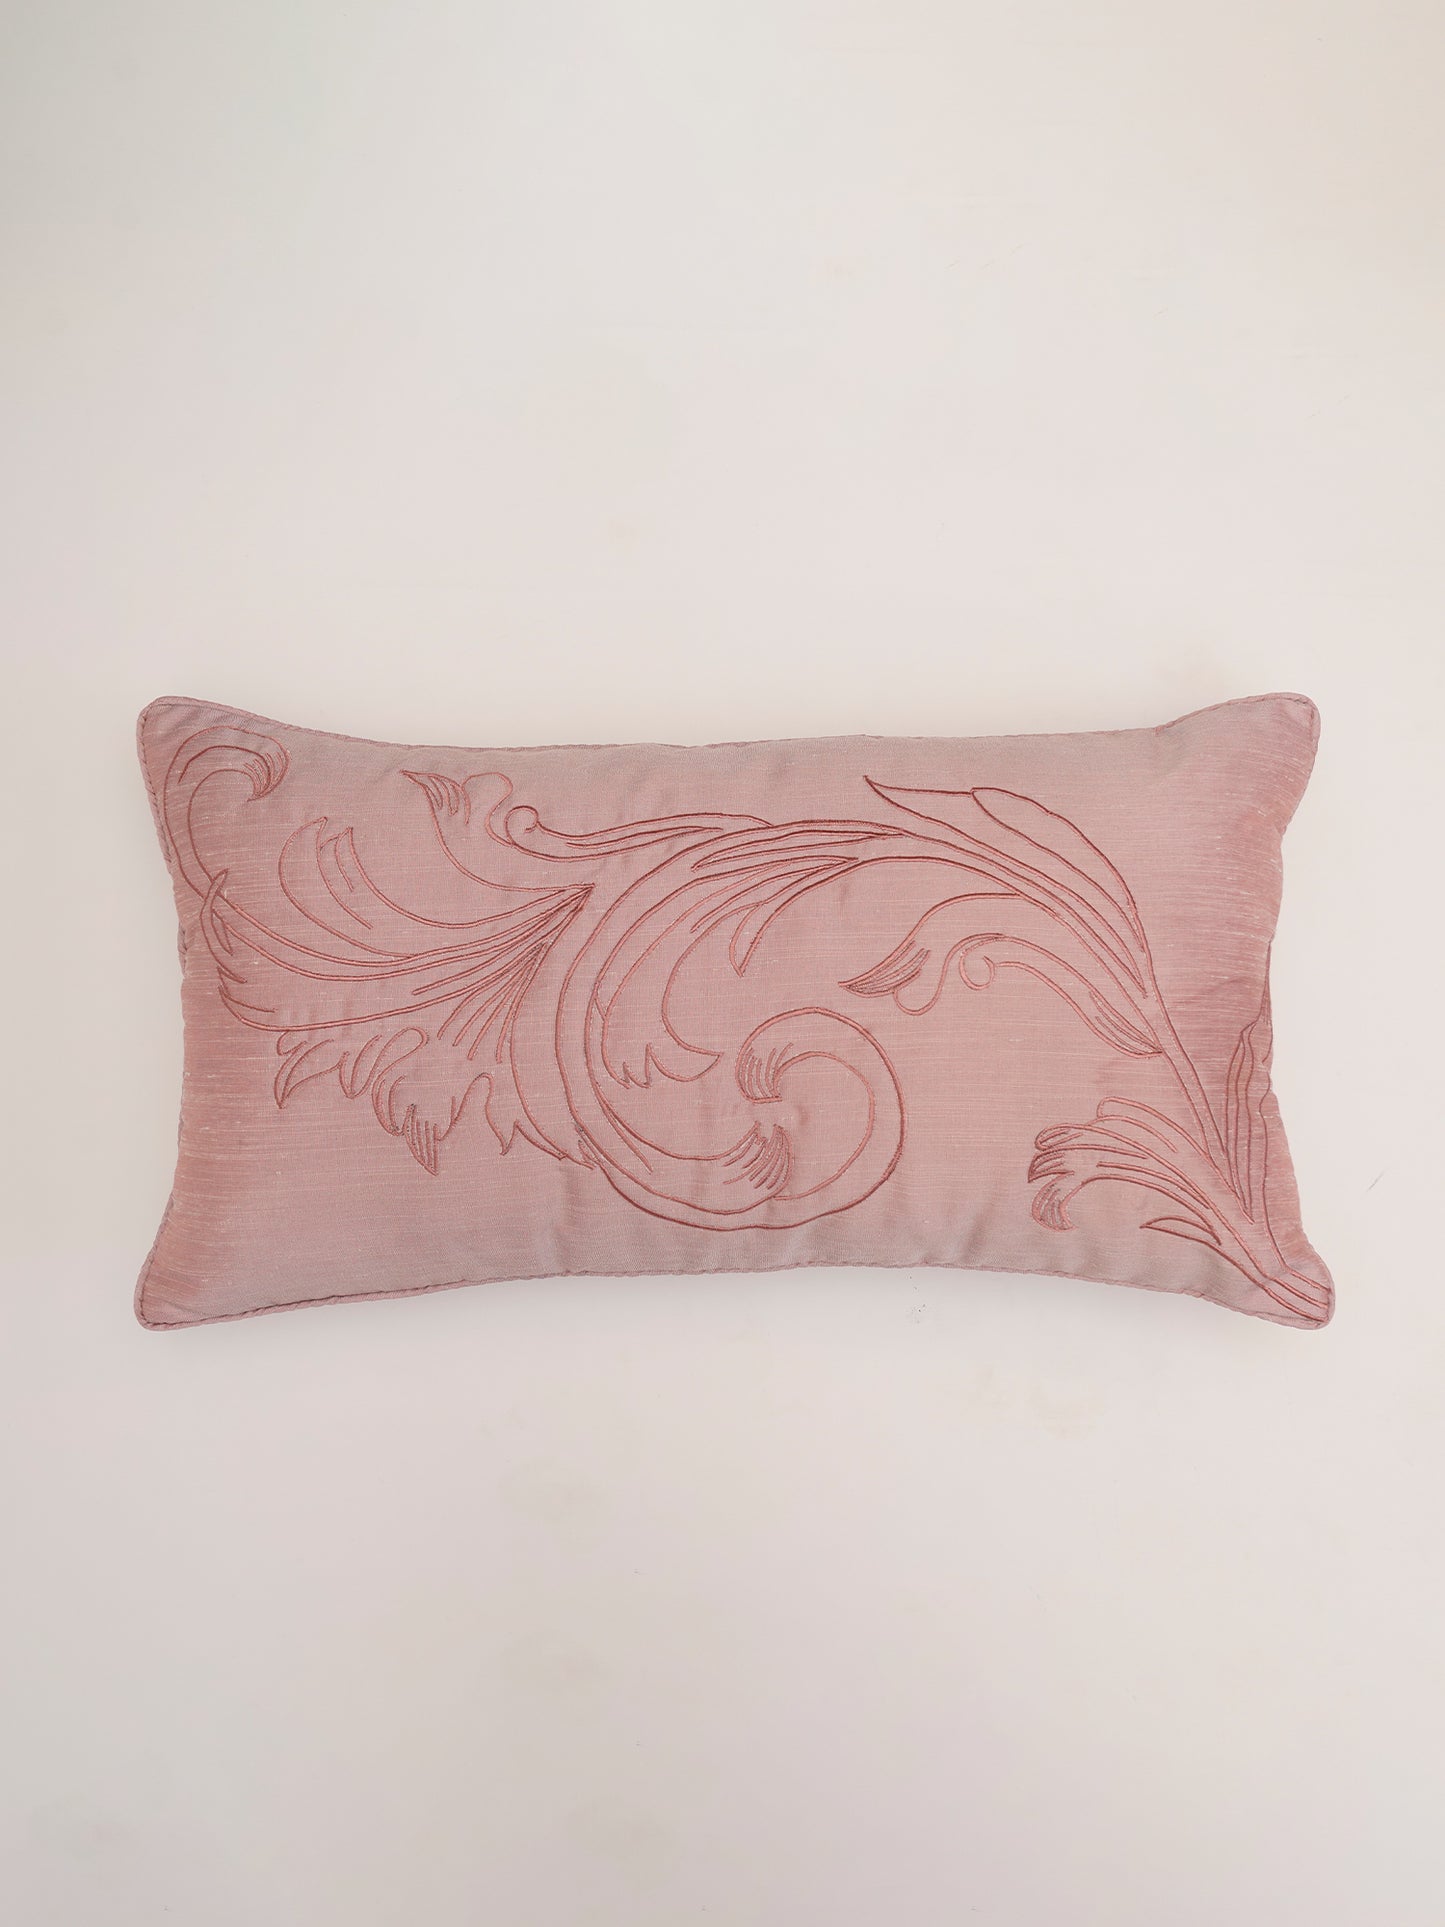 Cushion Cover Polyester Blend  Cord Piping and Quilting with Embroidery Pink - 12" X 22"